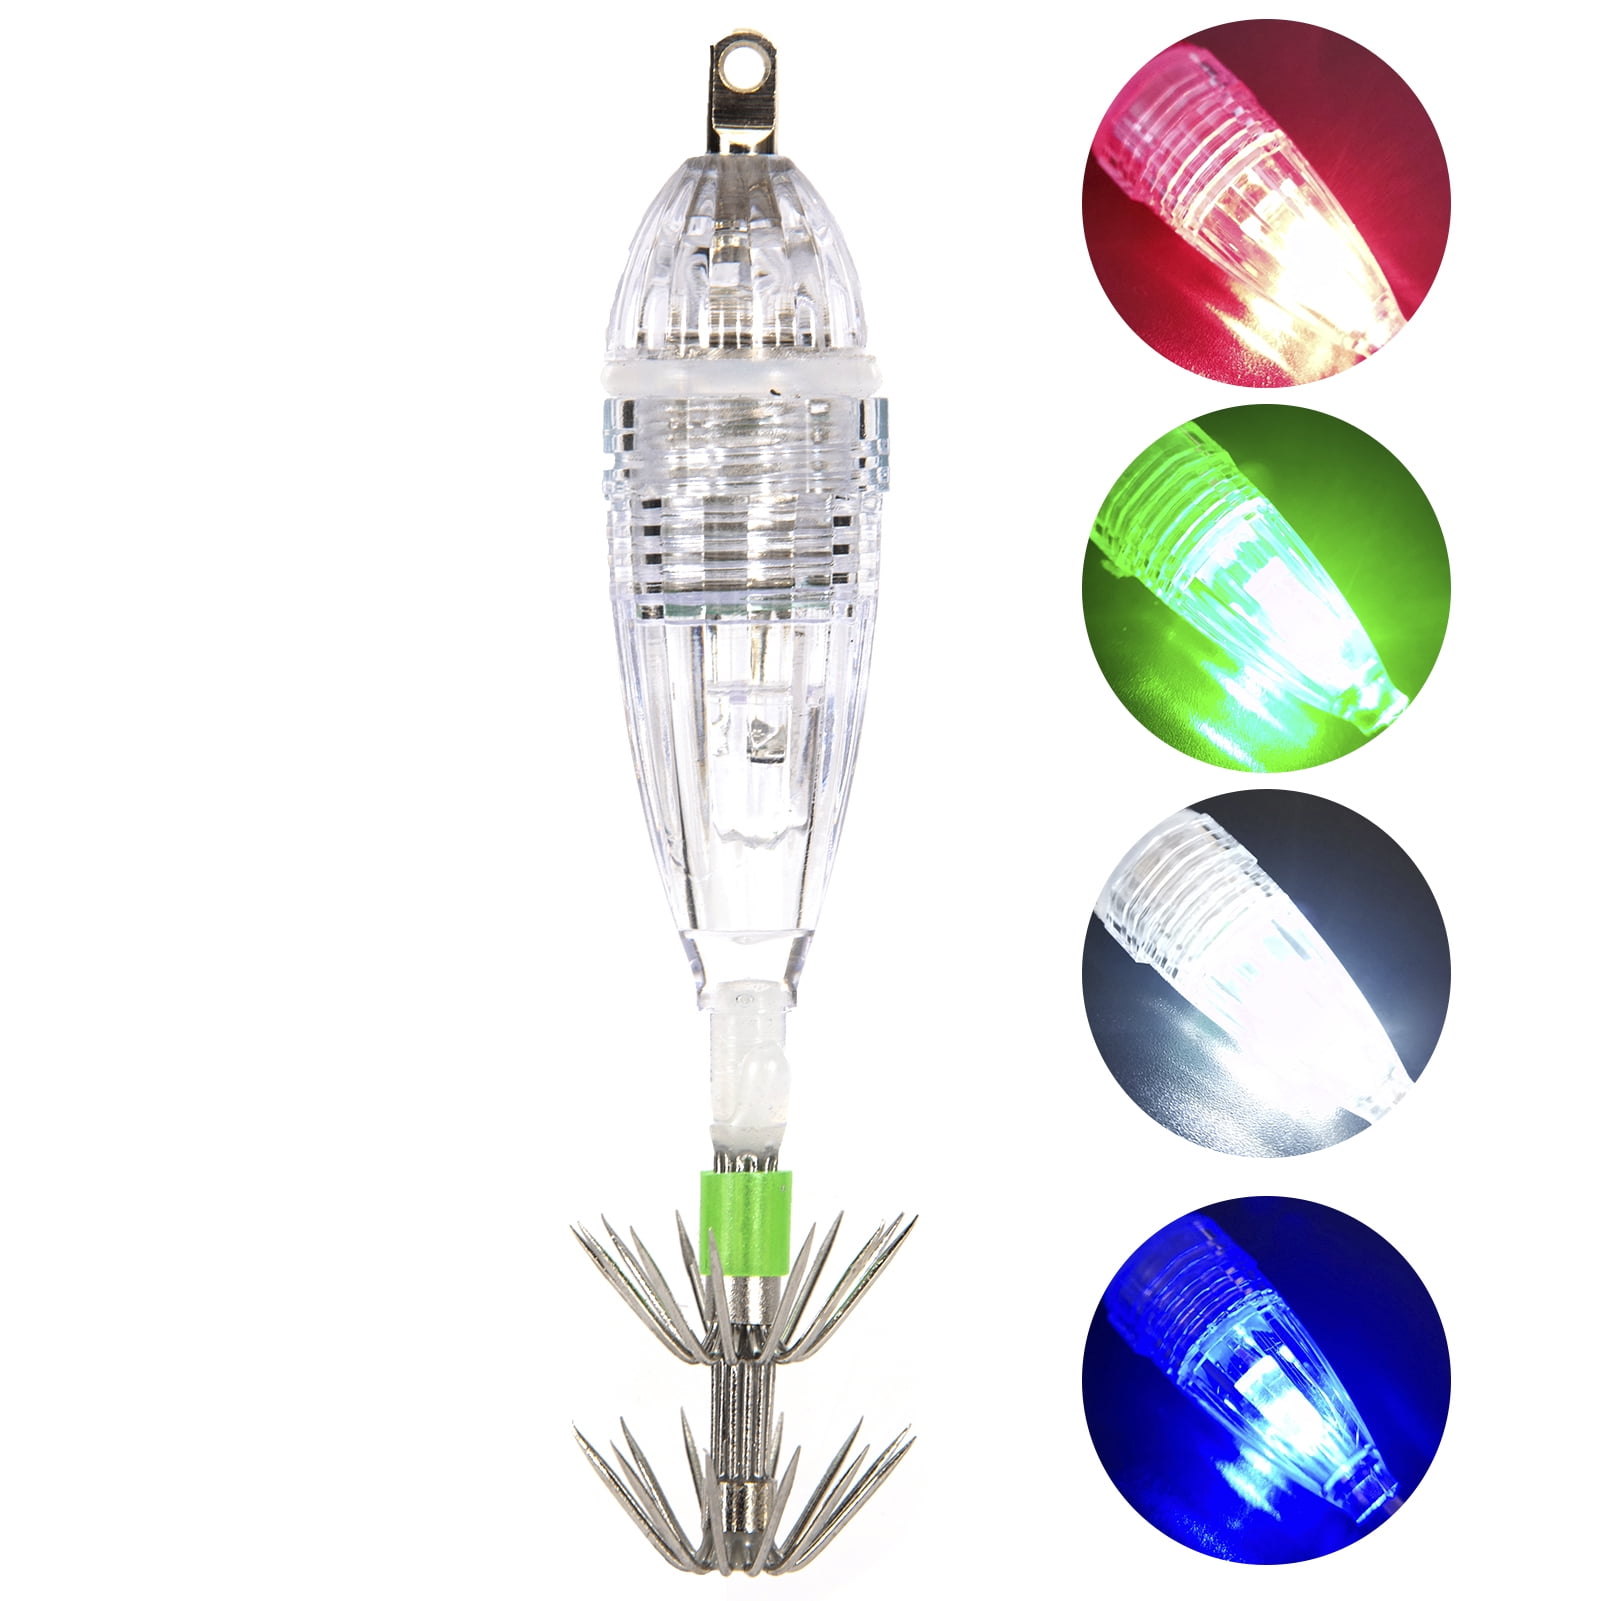 Details about   Durable Sea Fishing Freshwater Underwater Attracting LED Lure Light Equip W/Hook 